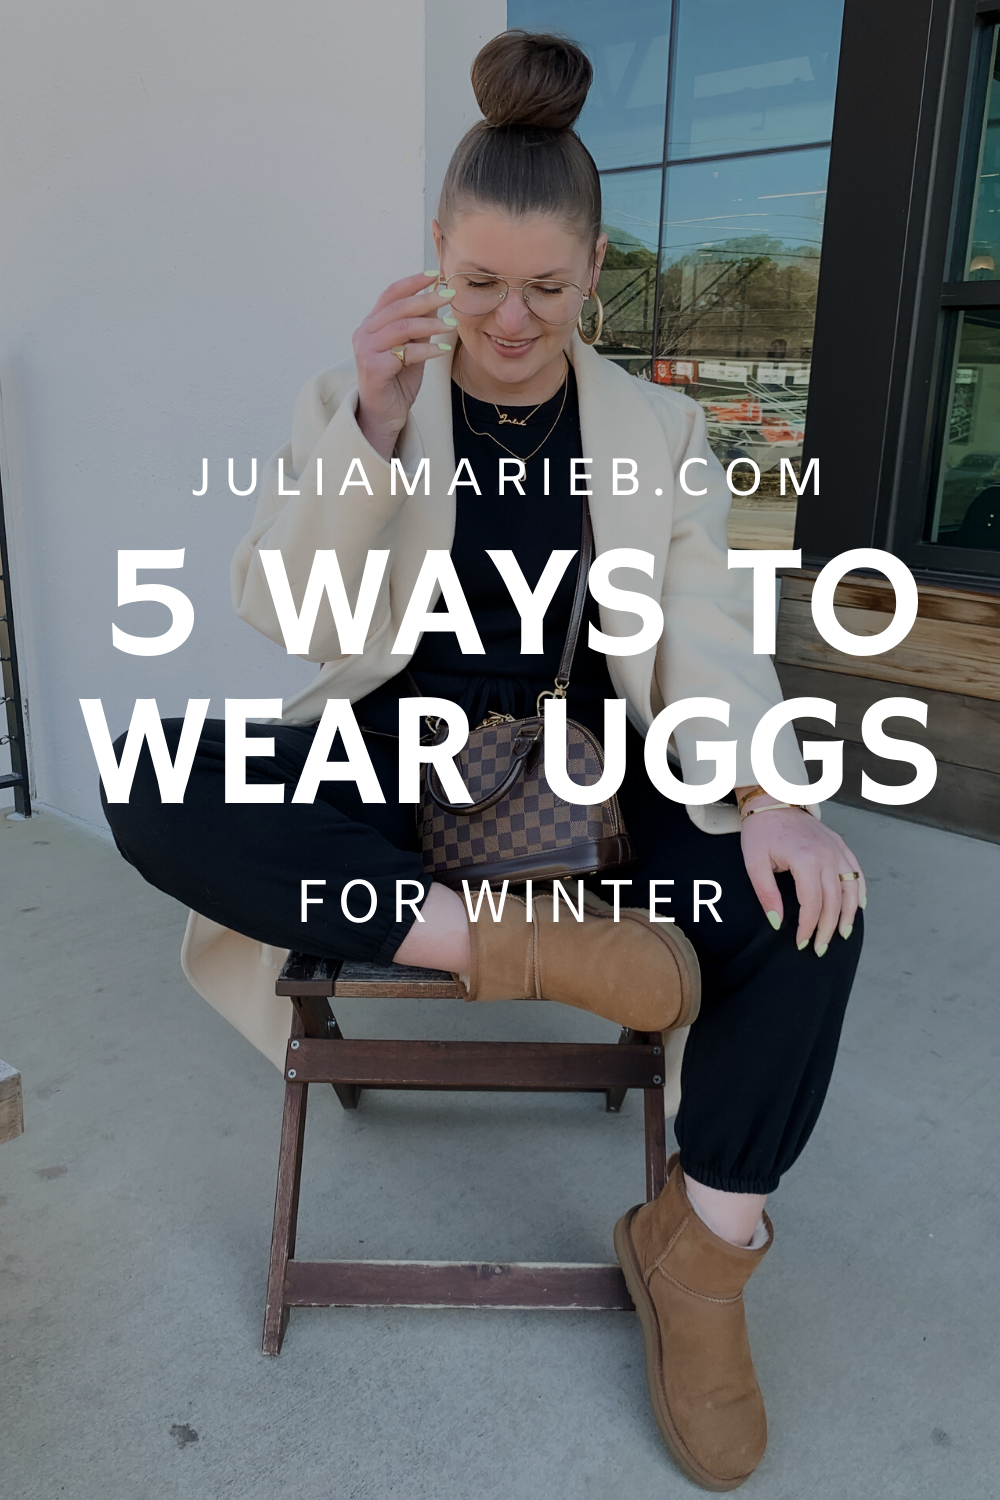 5 WAYS TO WEAR UGG BOOTS FOR WINTER: THE RULE OF 5